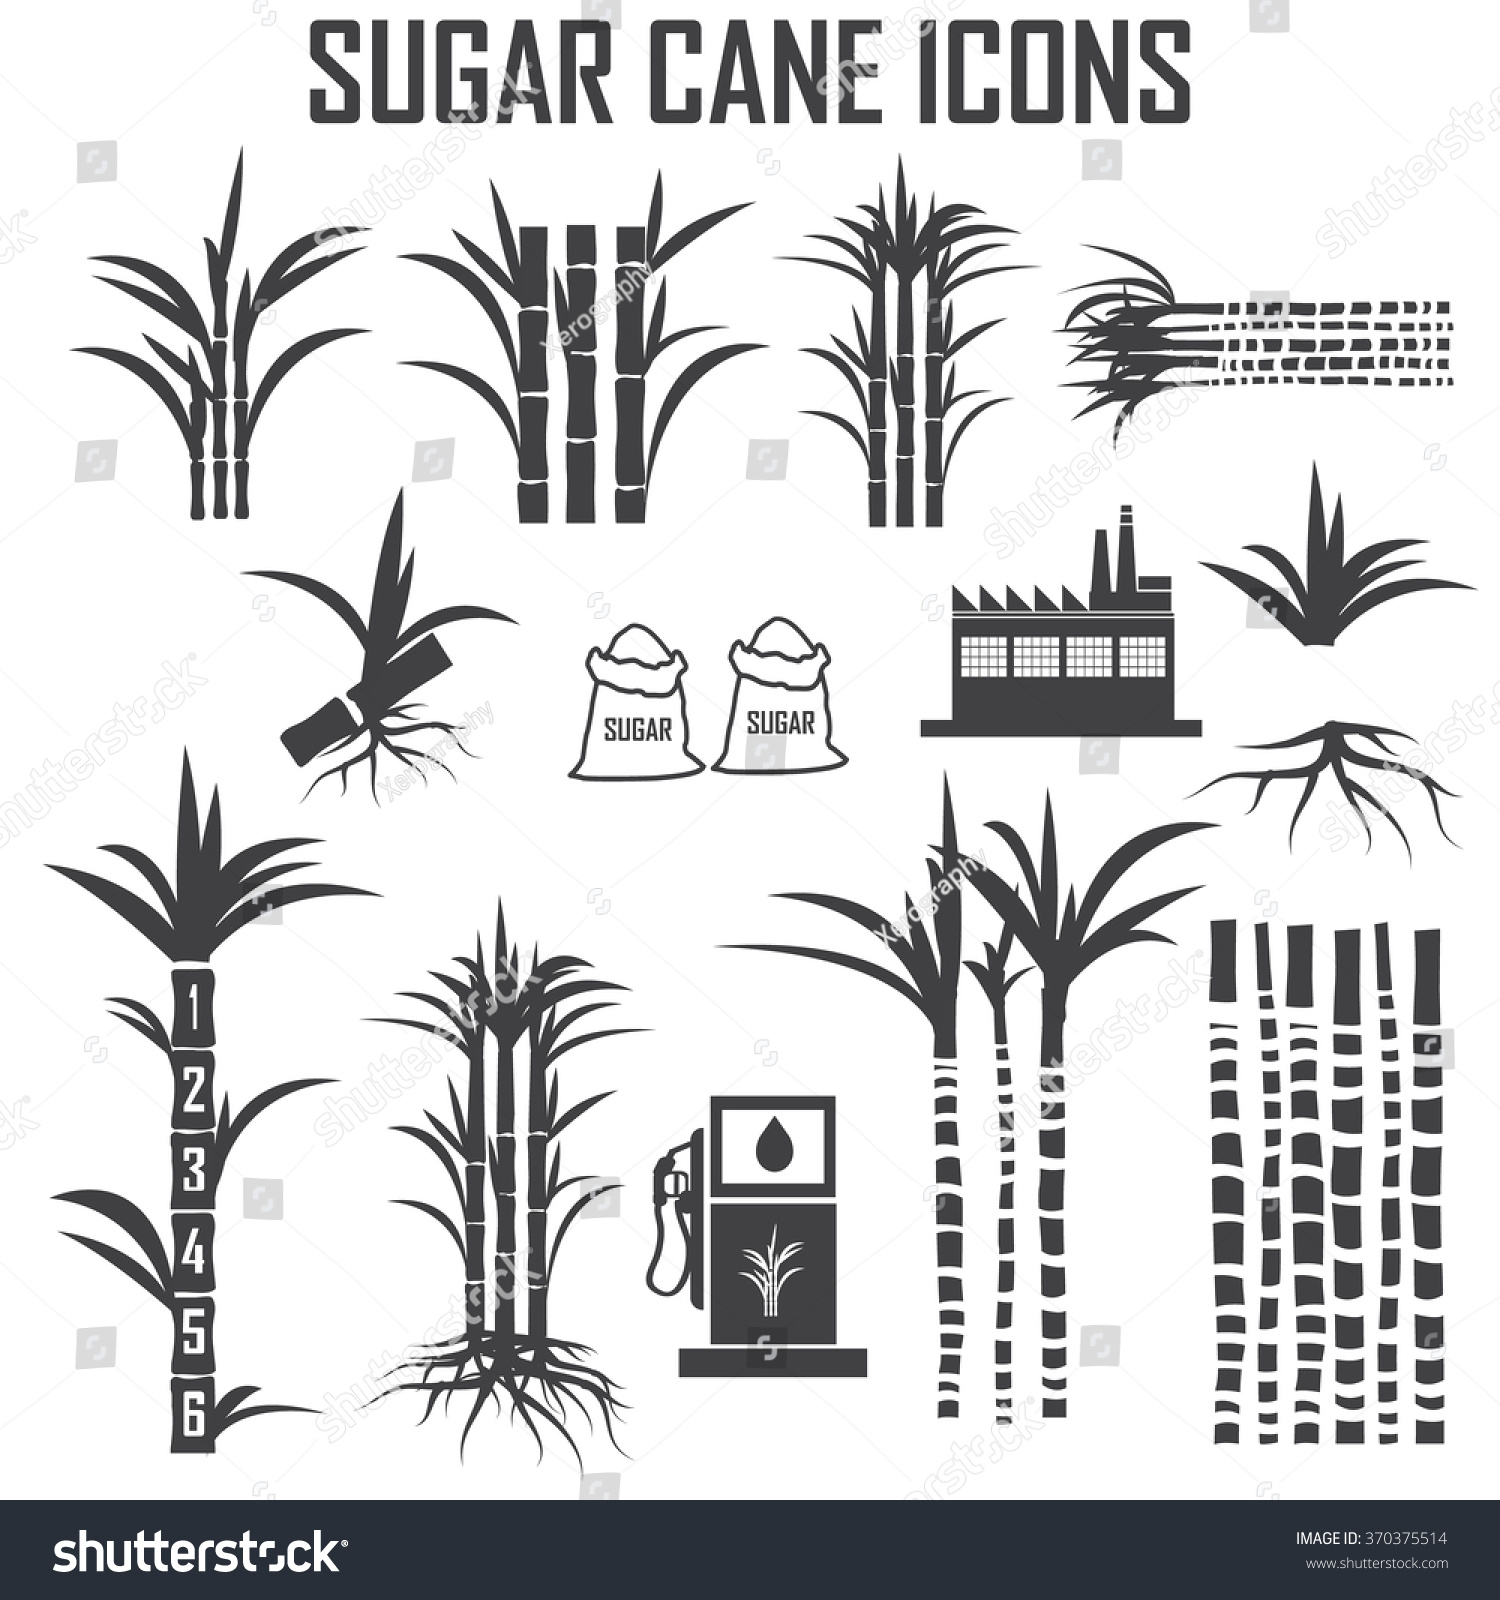 Sugar Cane Icons Vector. - 370375514 : Shutterstock